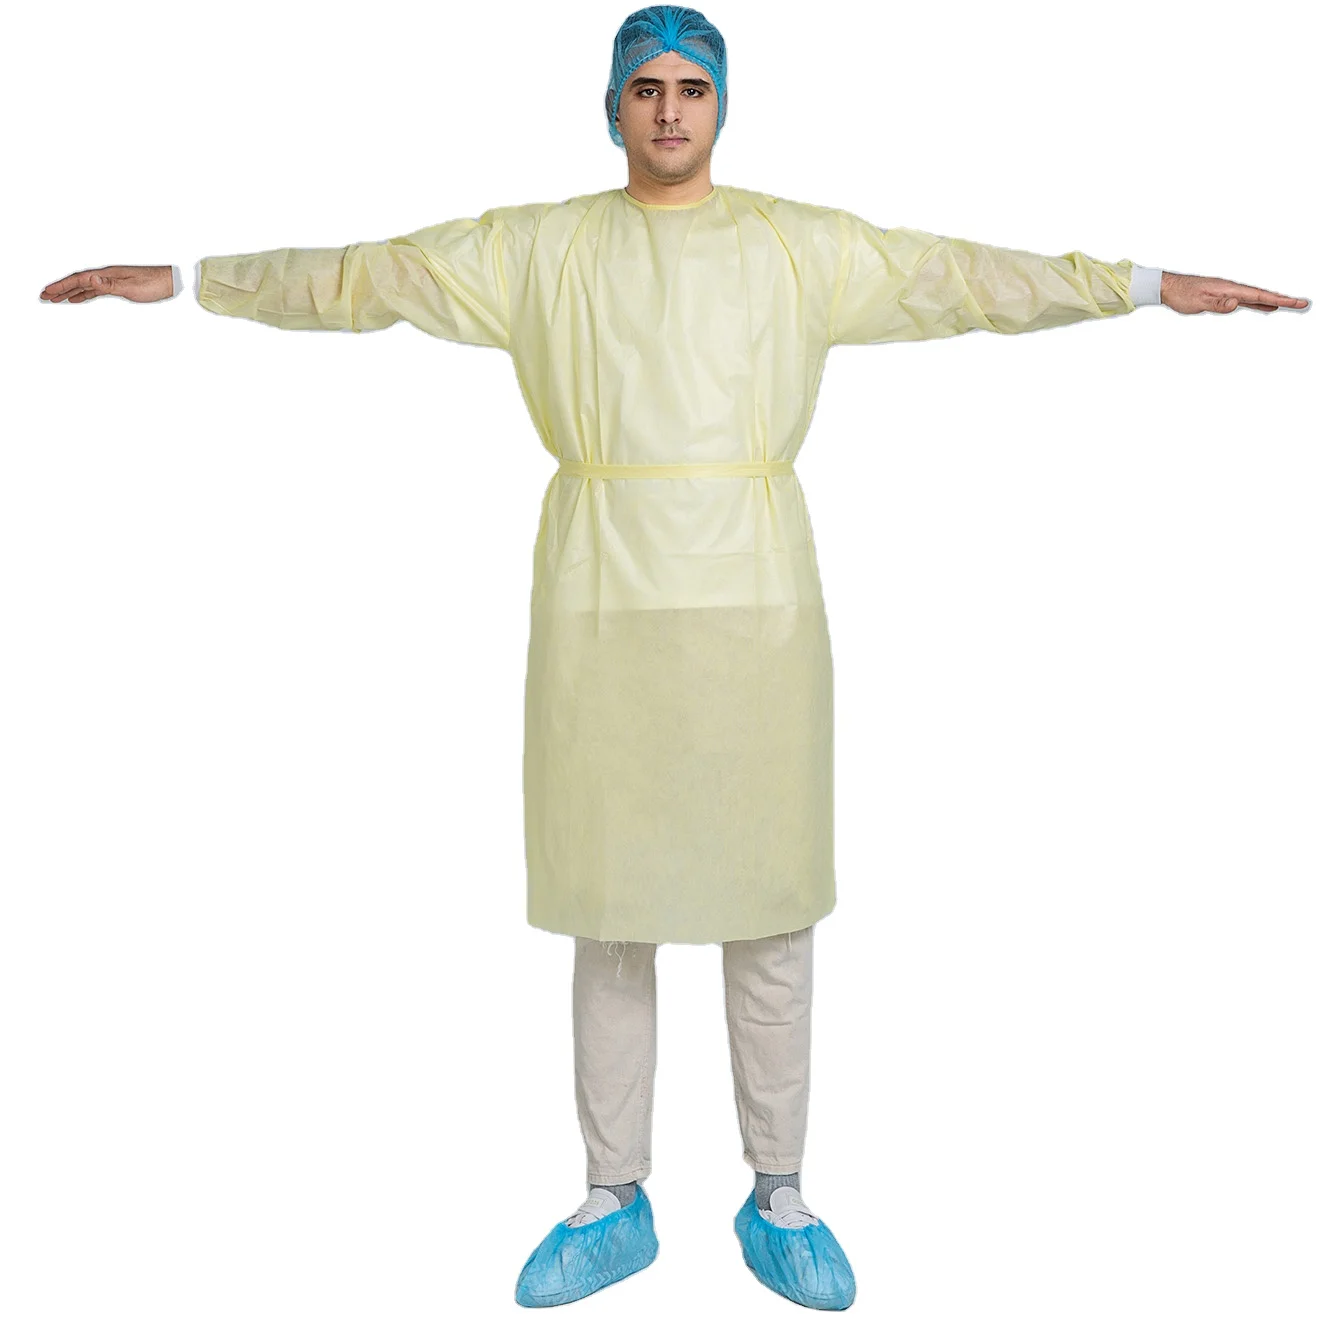 

Disposable sms pp cpe pppe protective blue yellow gowns isolation gown for women men medical isolation clothes girl gown, Customized color